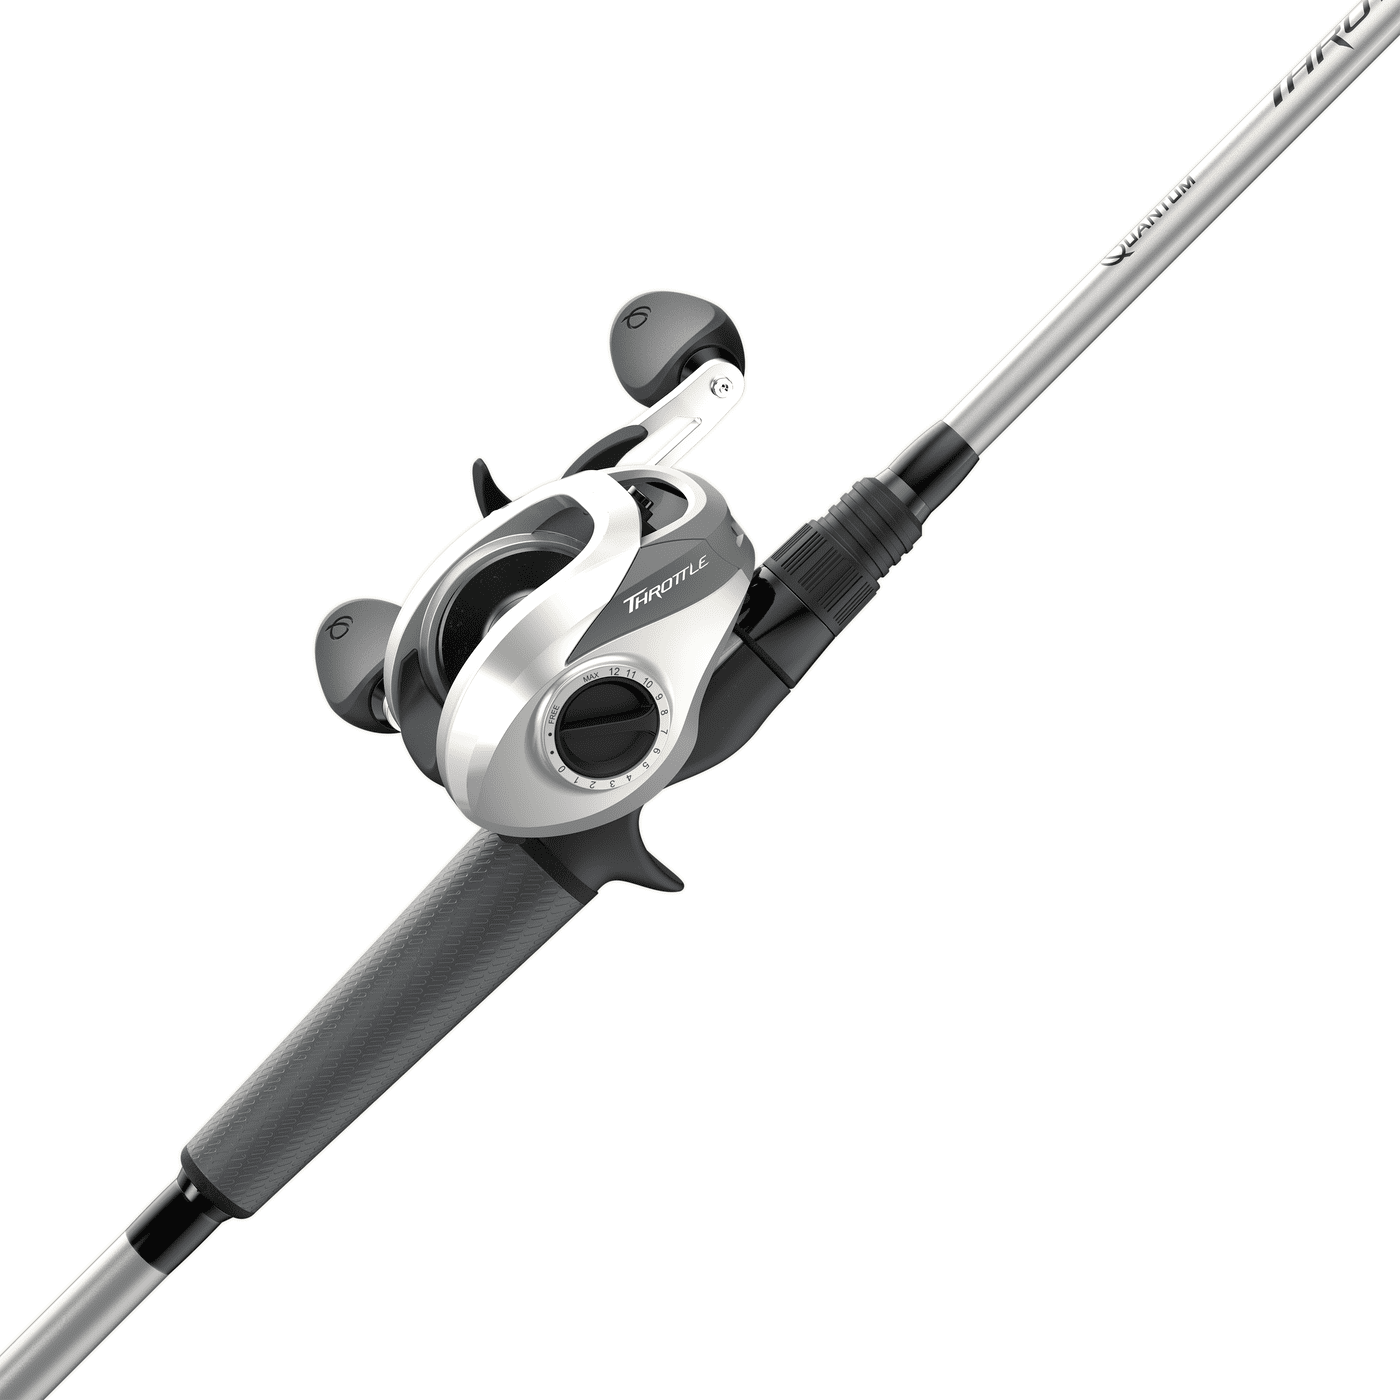 QUANTUM Throttle Spinning Rod and Reel Combo